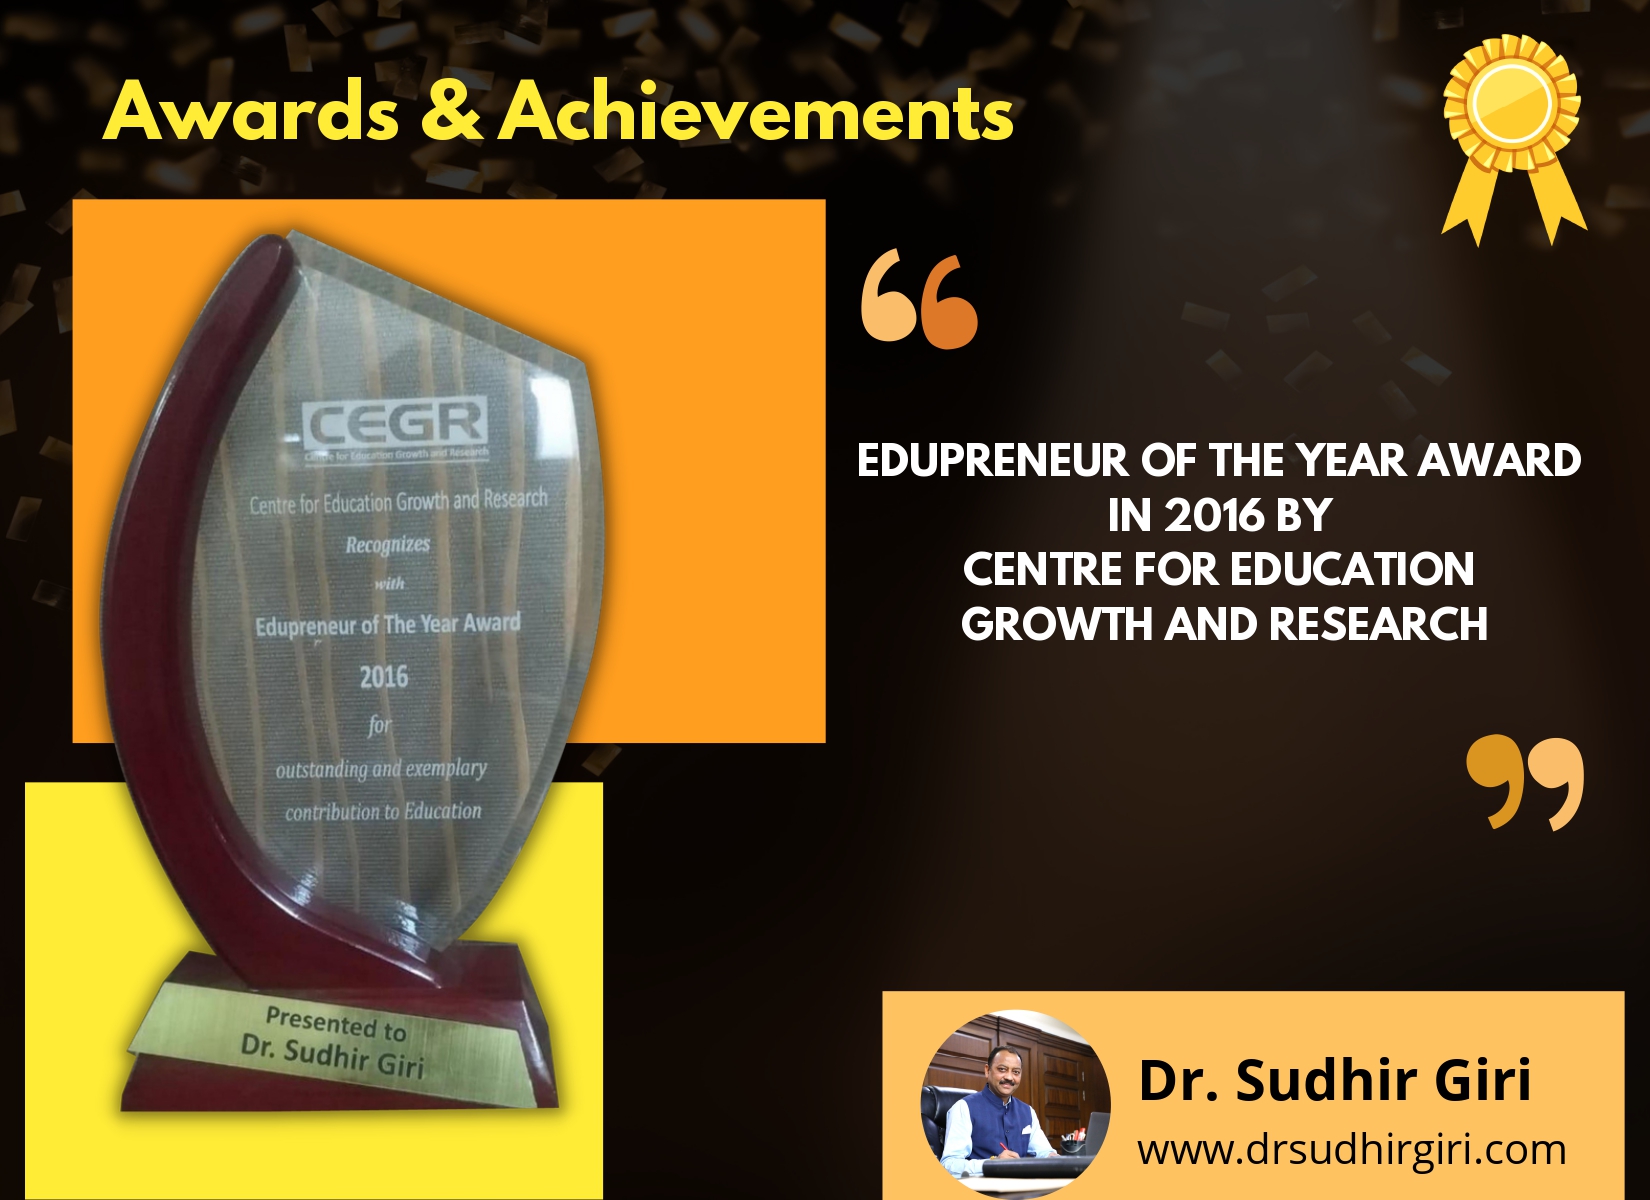 Sudhir Giri - Edupreneur of the Year Award in 2016 by CENTRE FOR EDUCATION GROWTH AND RESEARCH